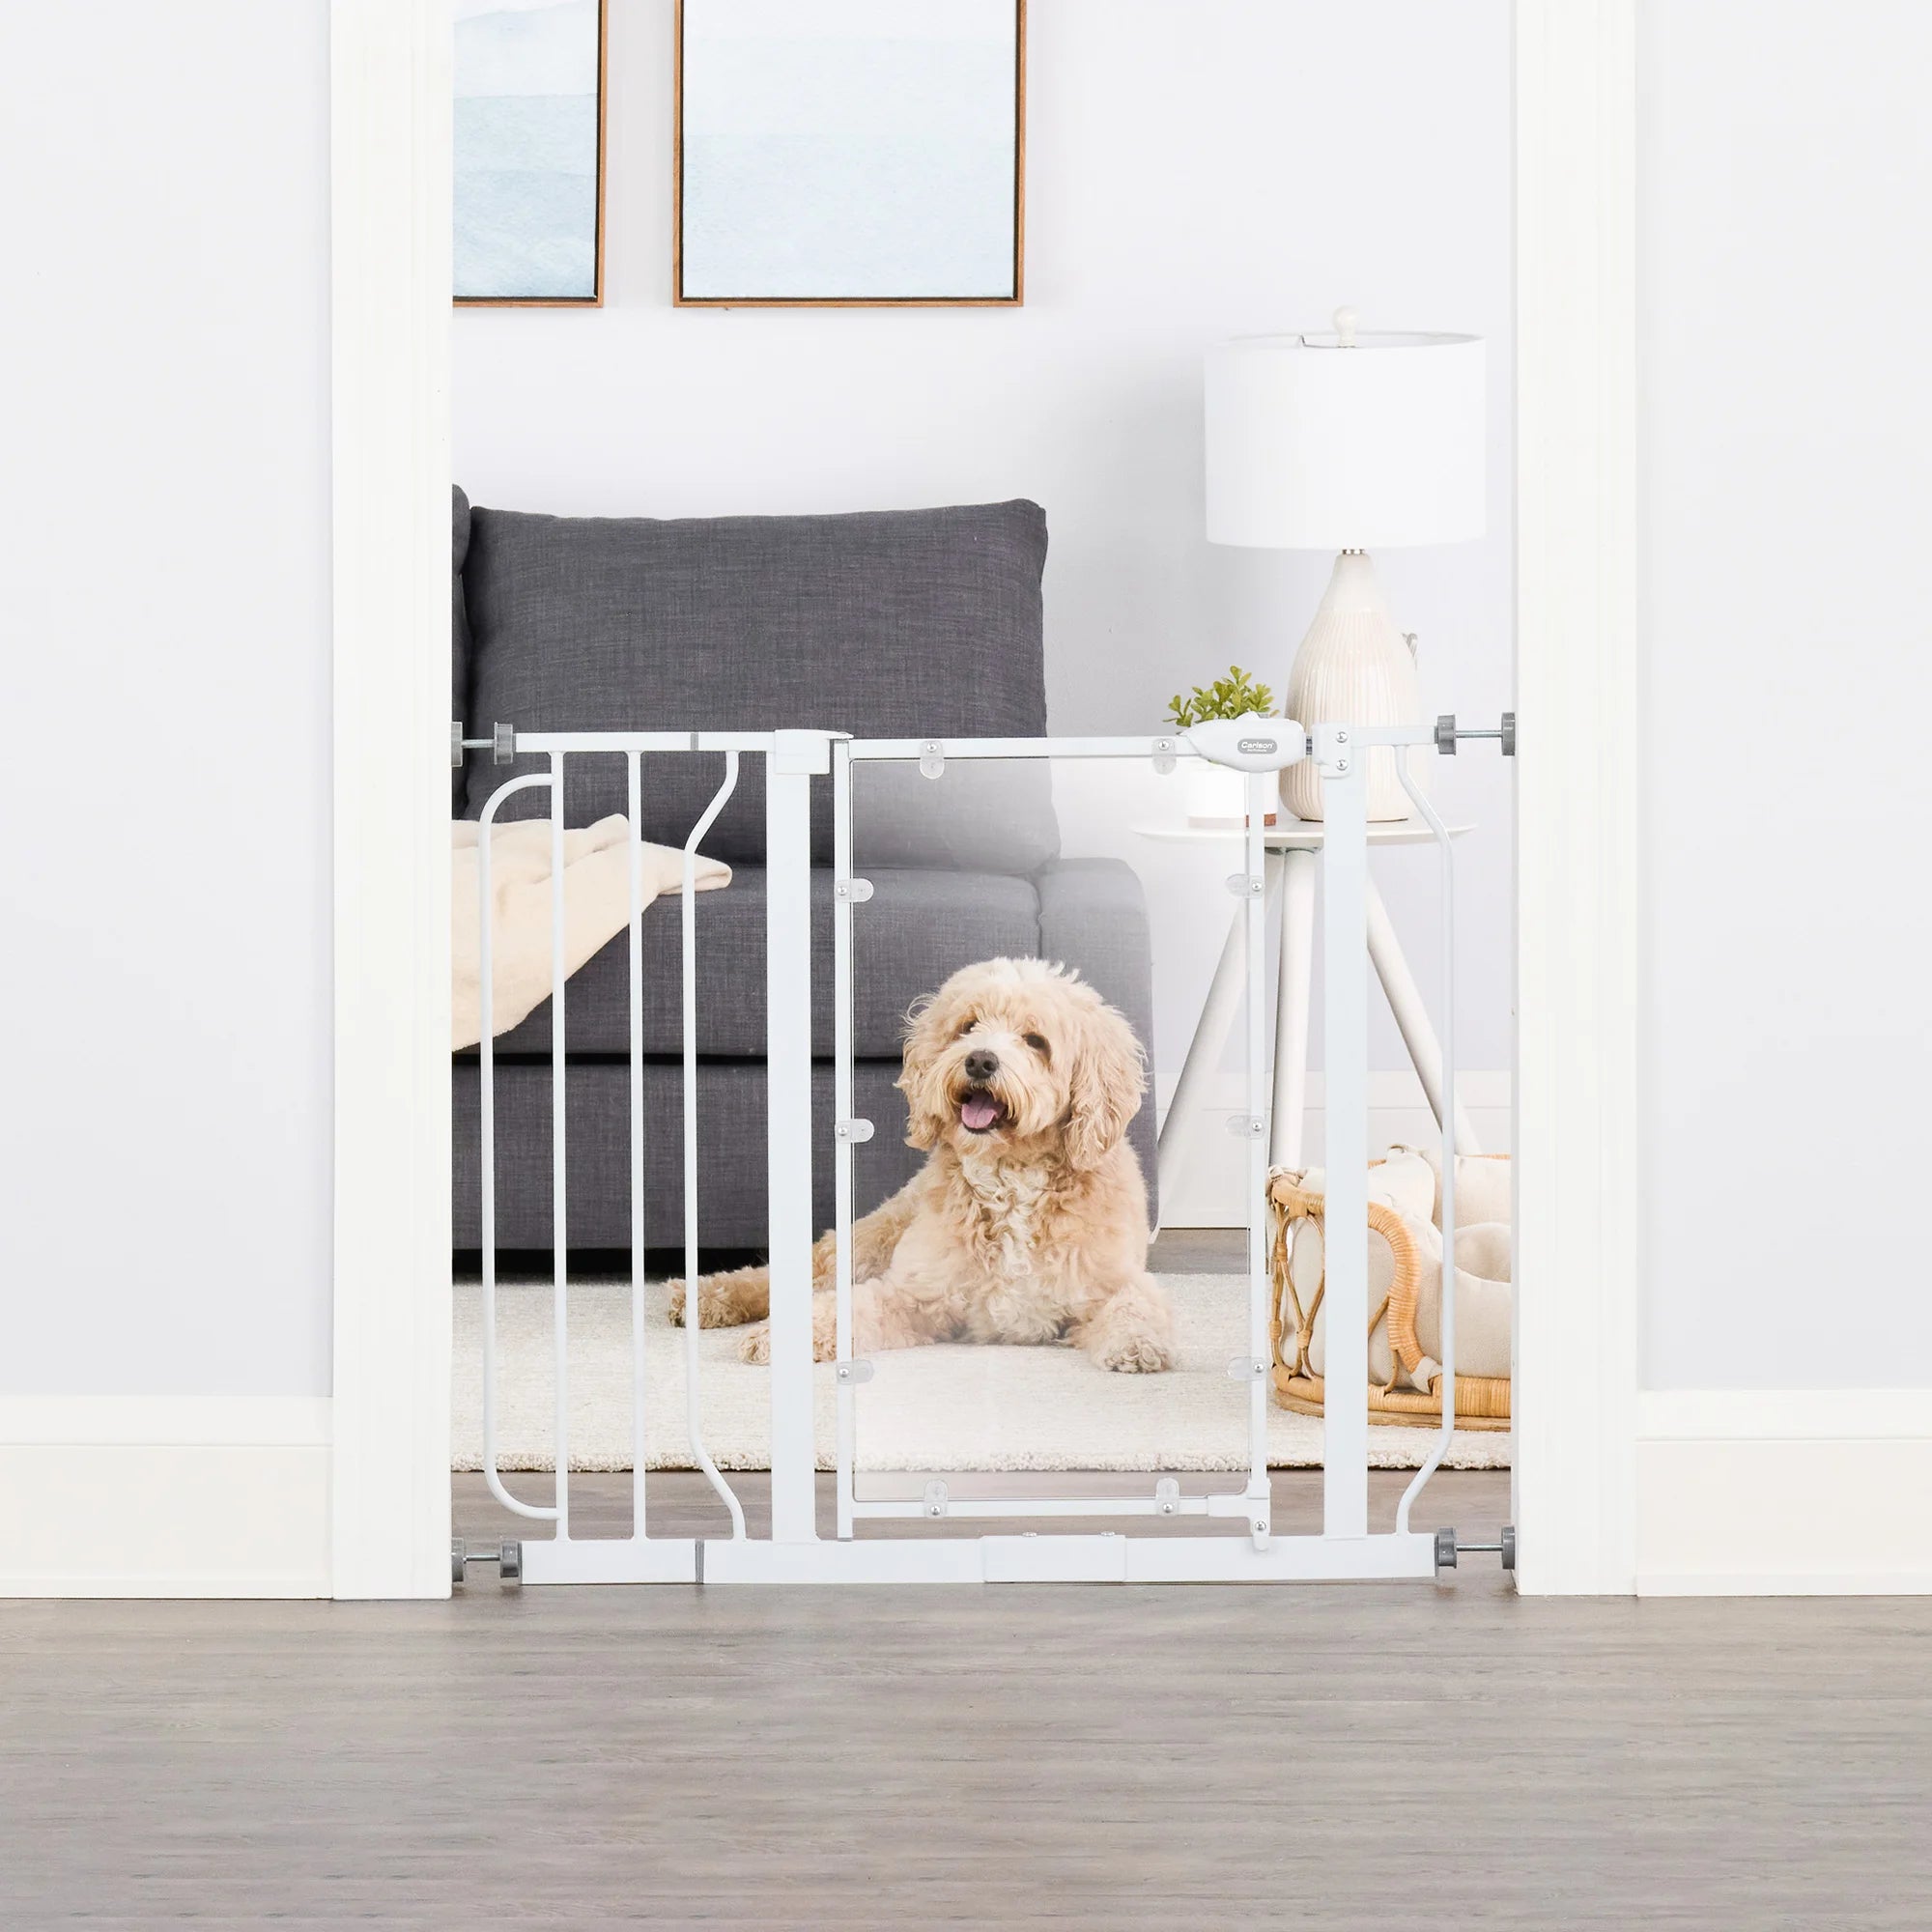 Dog sitting on ground in living room behind Direct View™ Pet Gate.